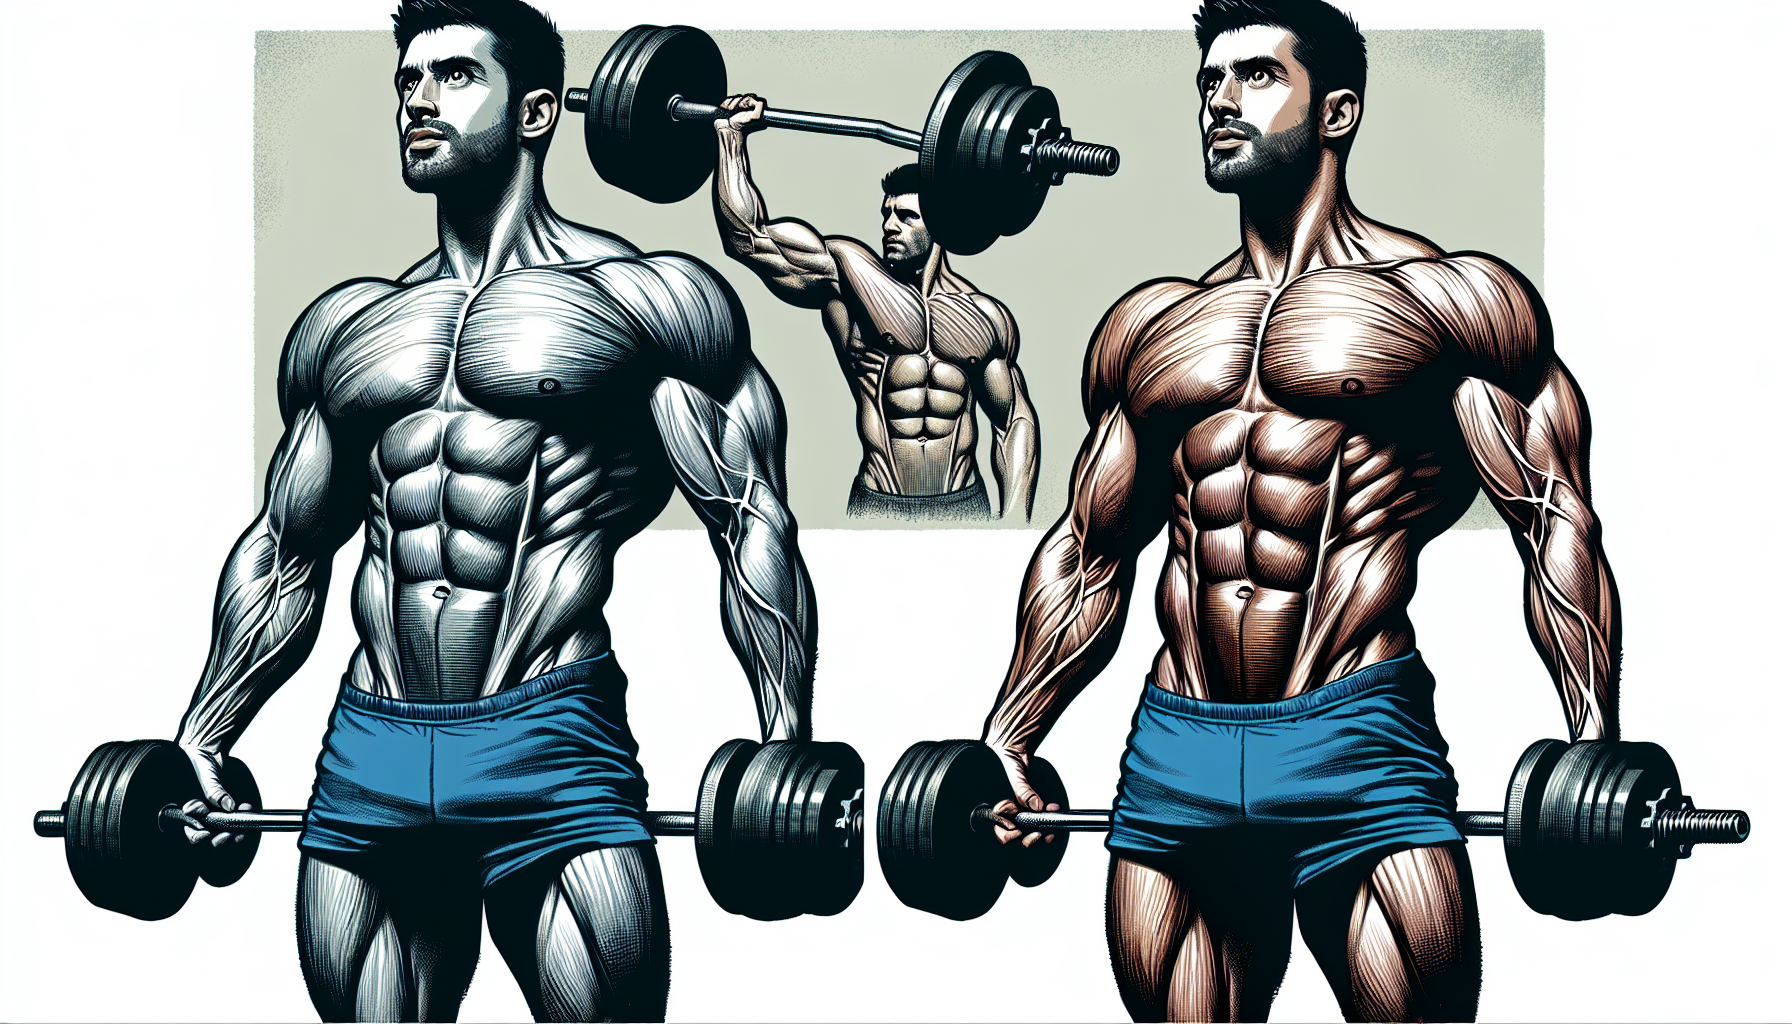 Illustration of increased muscle mass and strength gains